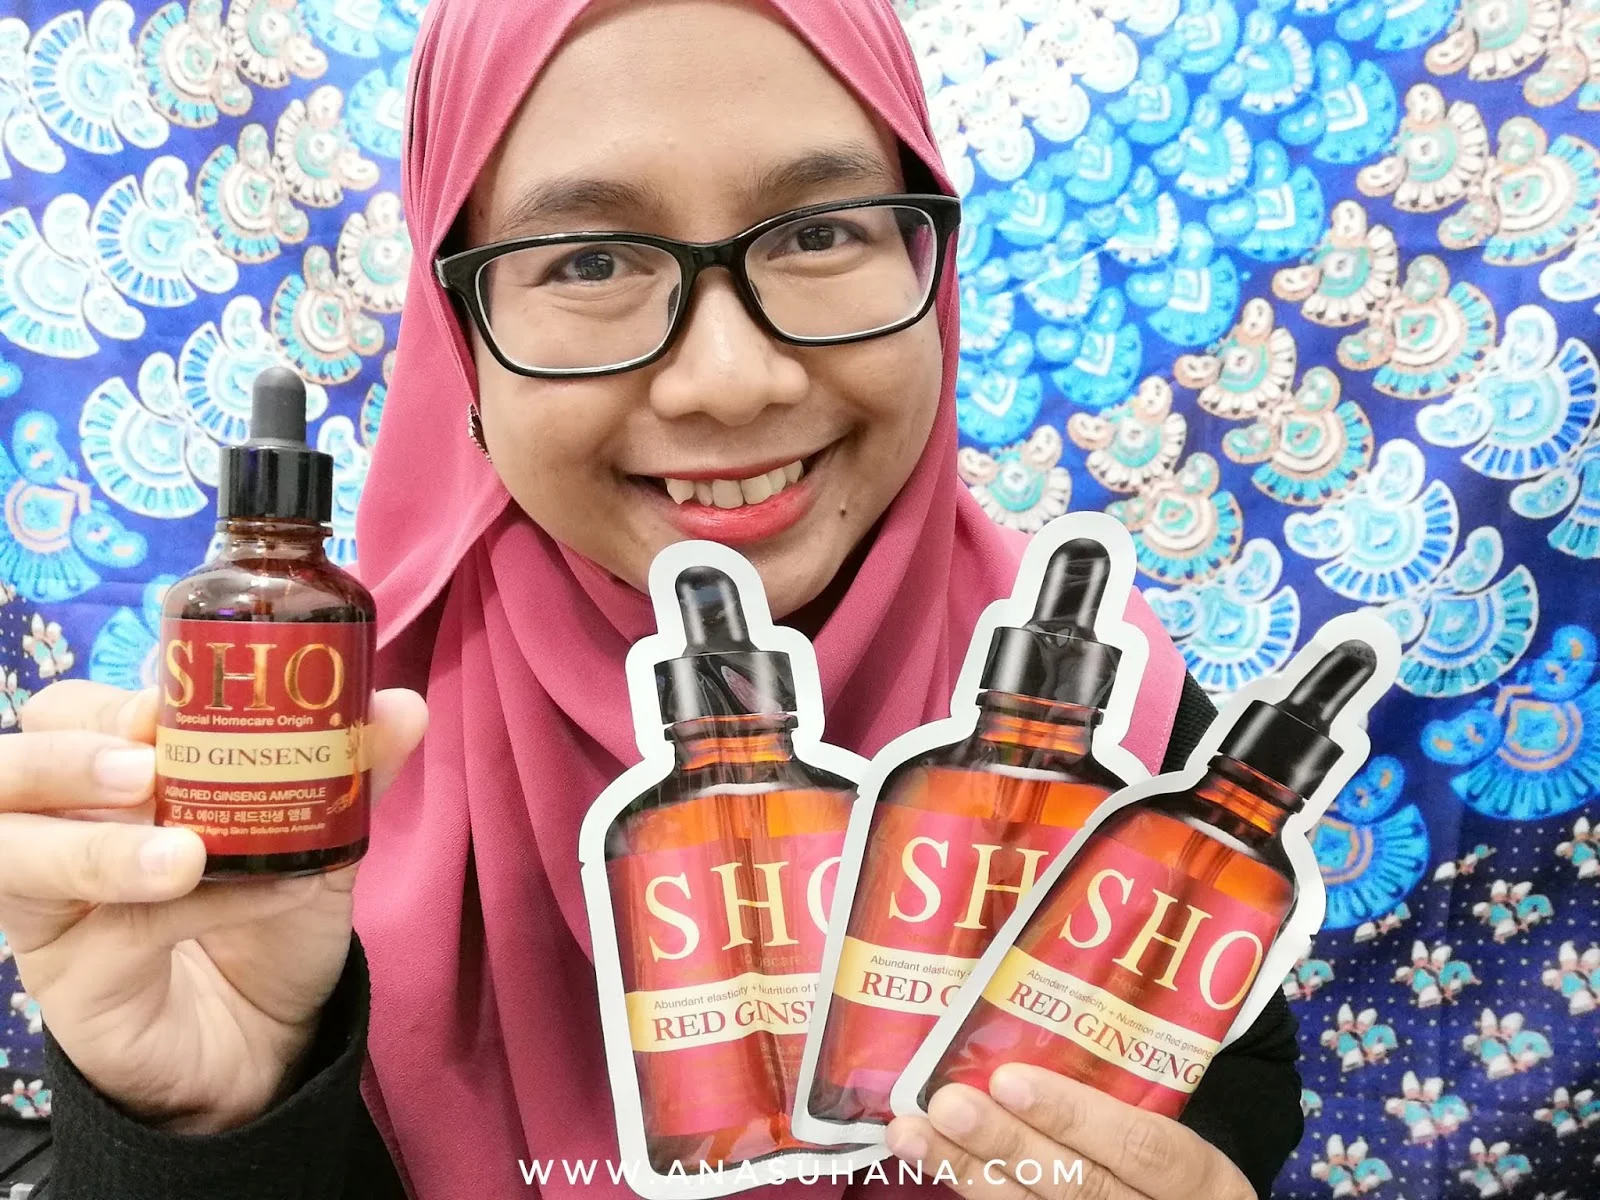 SHO Aging Red Ginseng Ampoule & Ampoule Mask